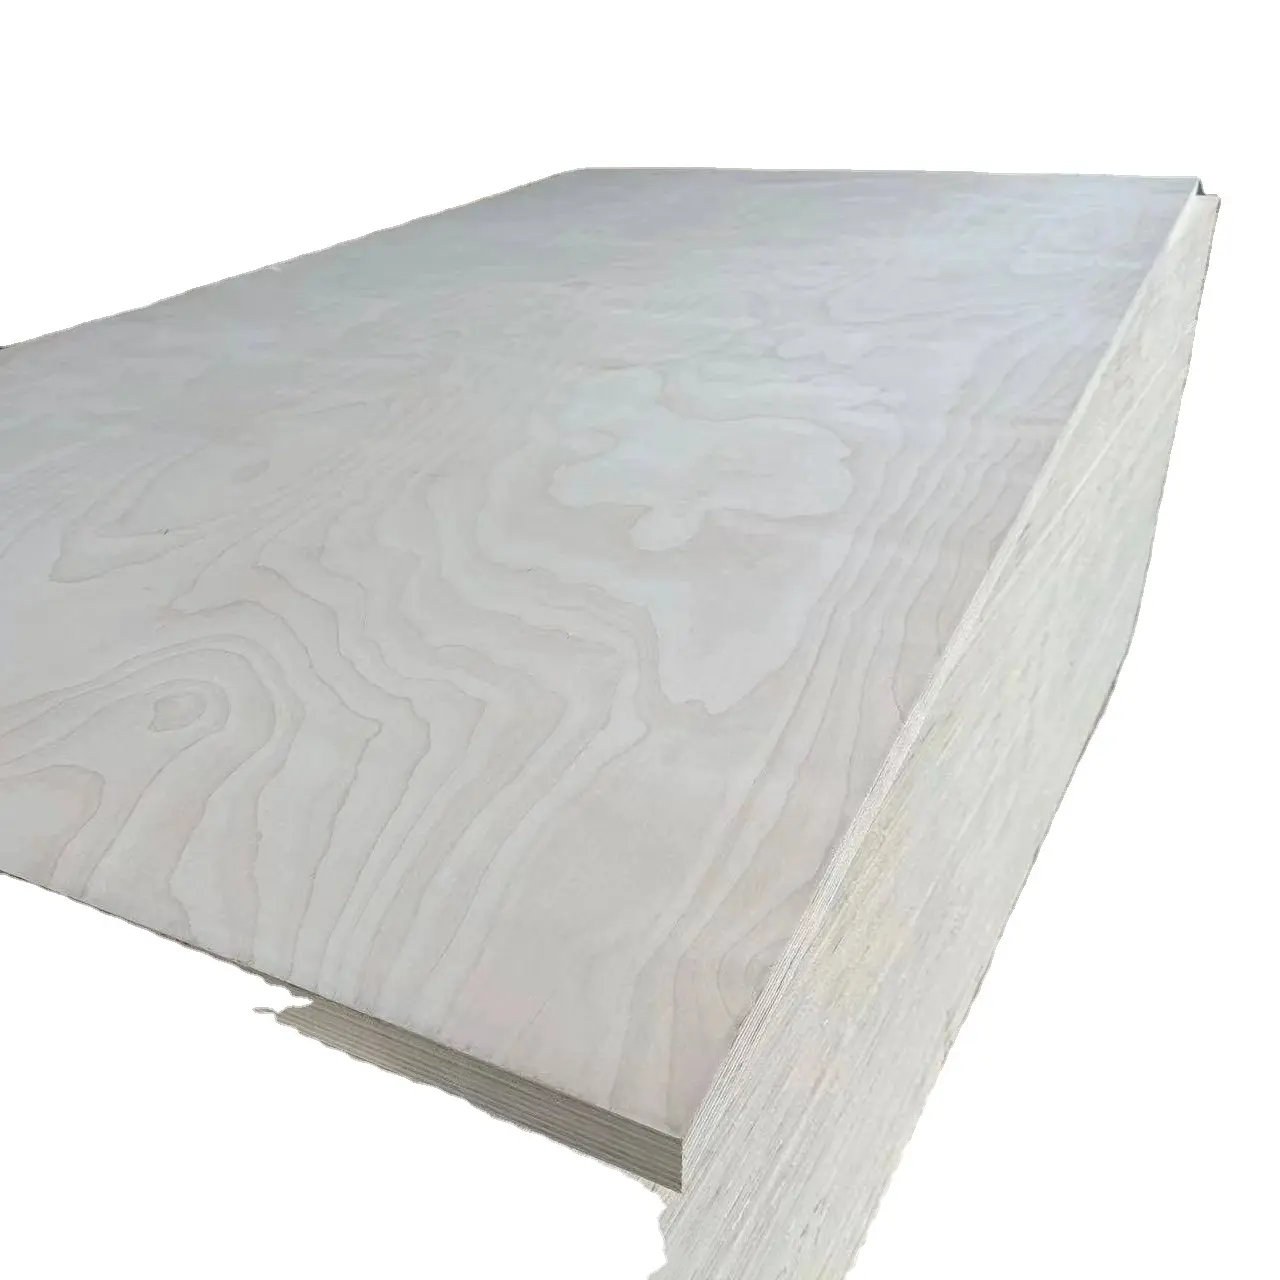 plywood manufacture window design sheet 4x8 5/8 prefinished birch plywood manufacture board for furniture